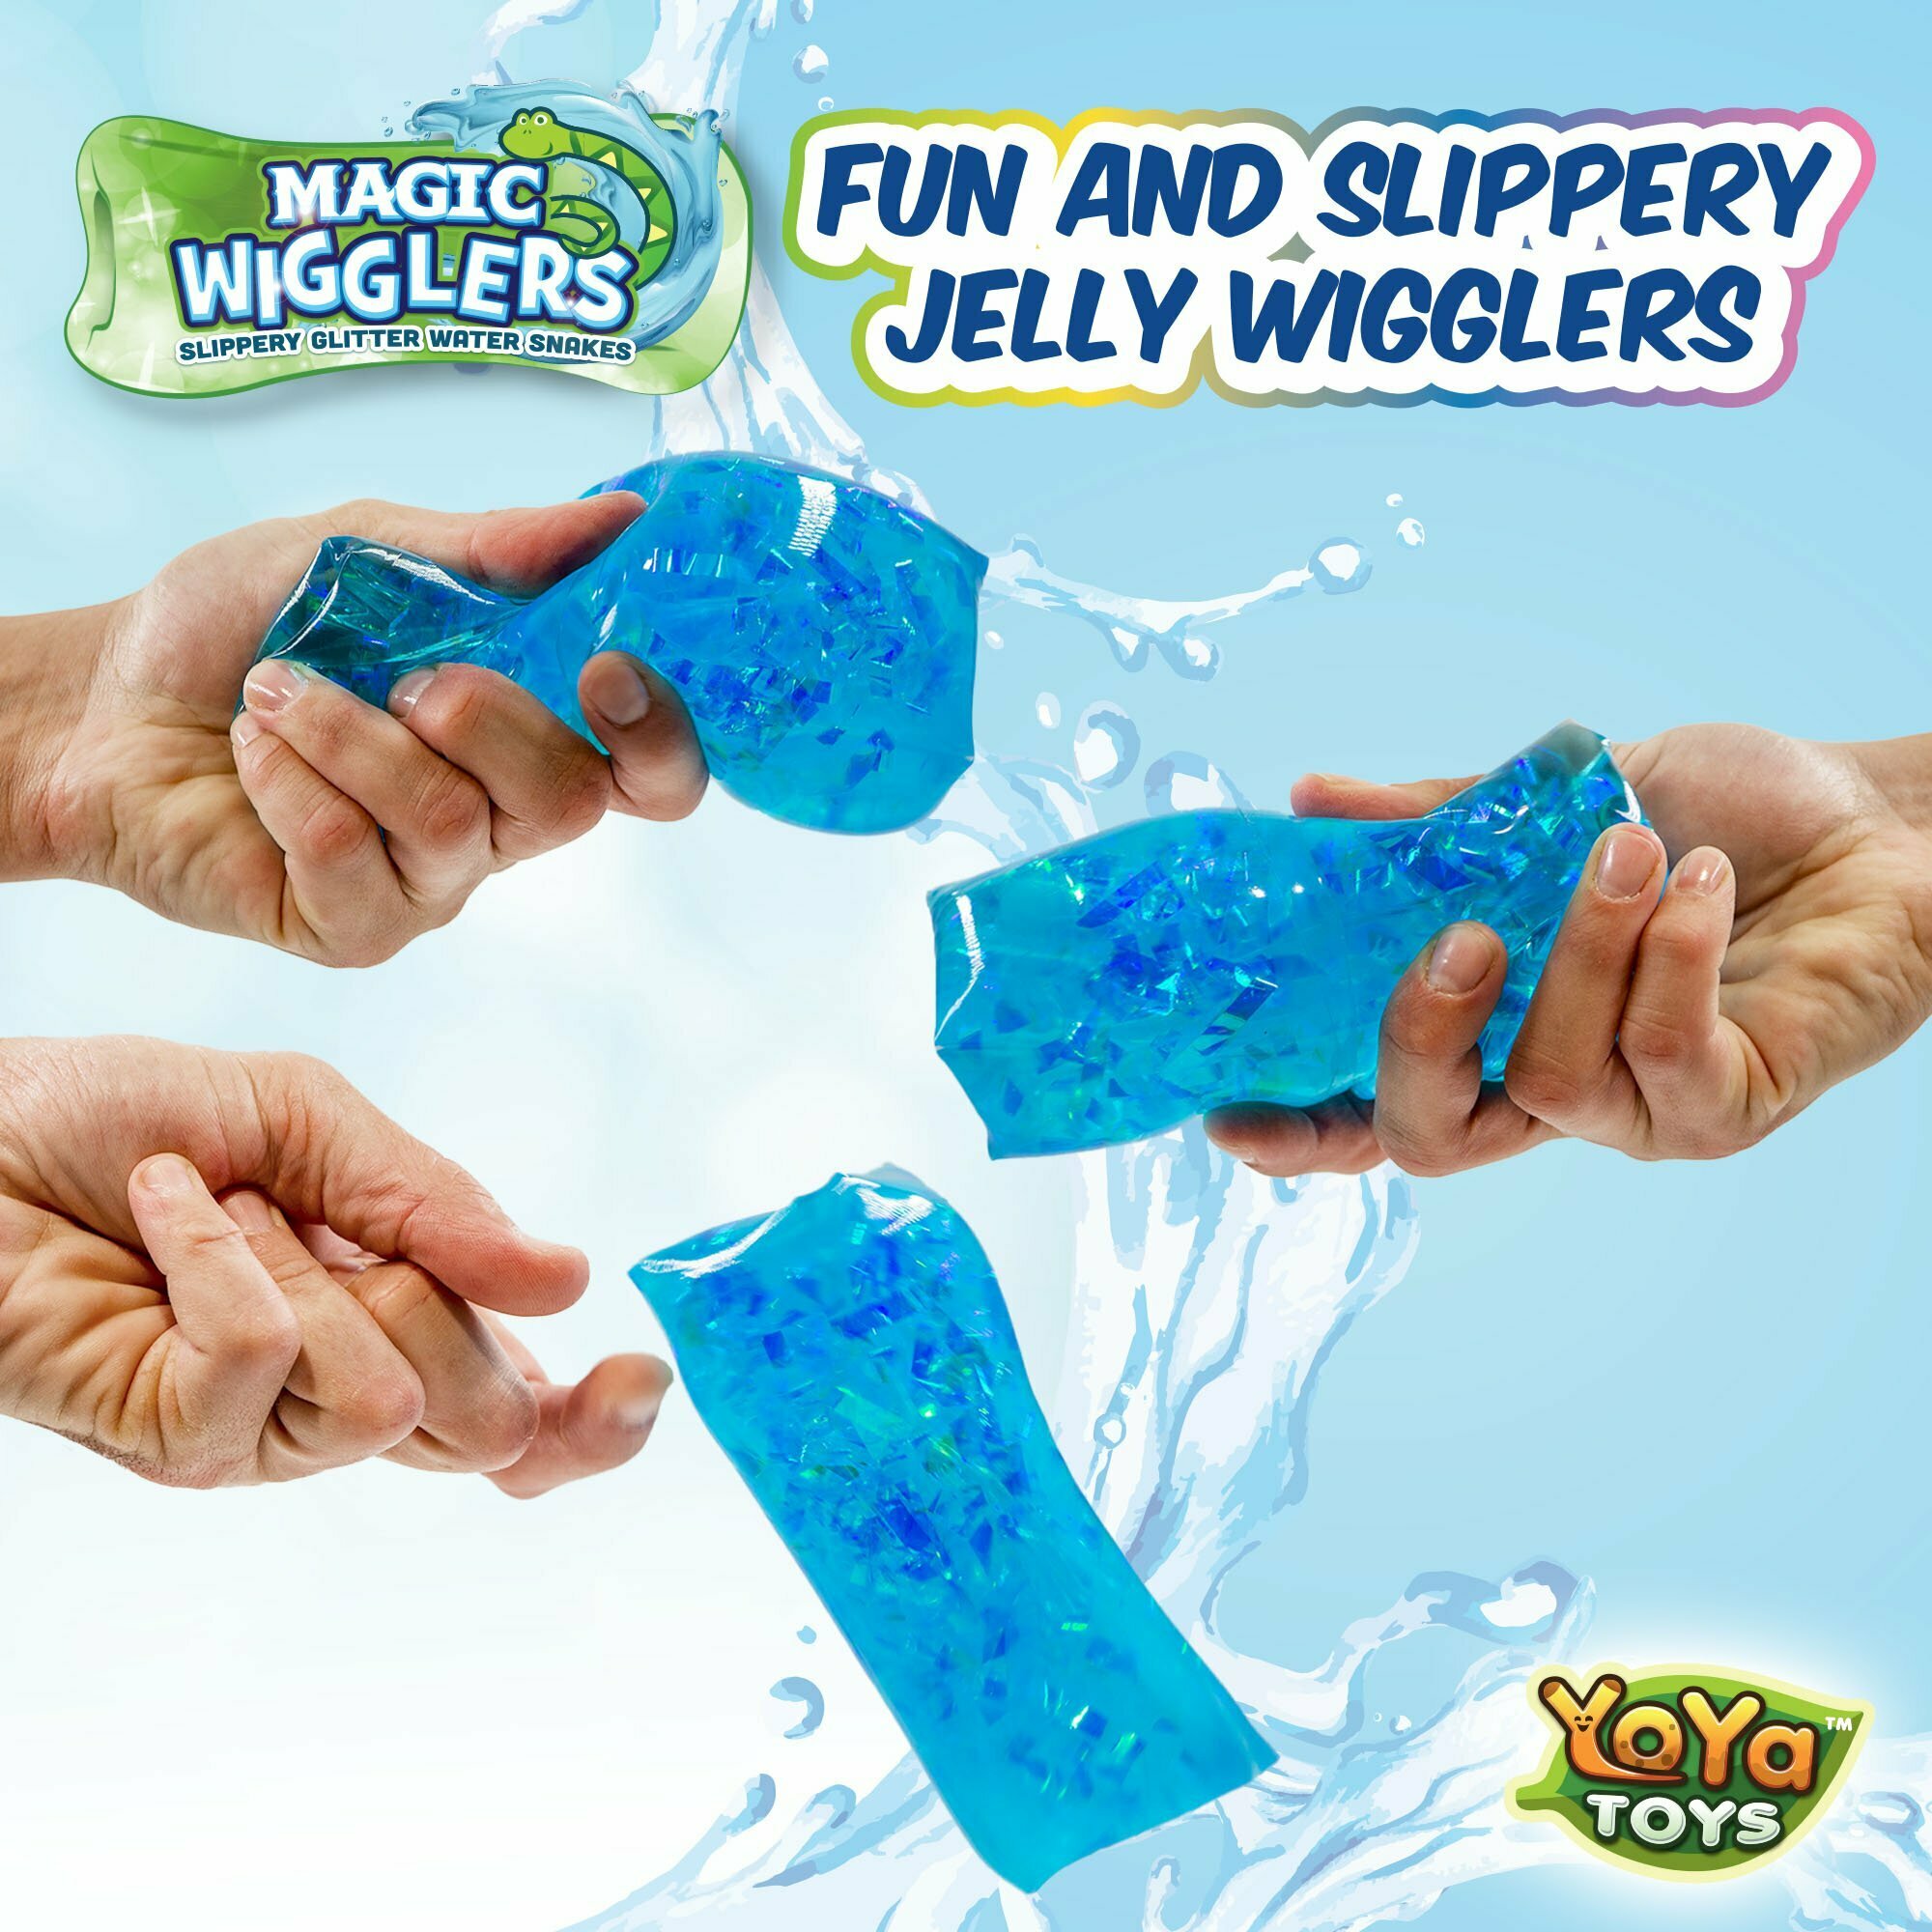 barry cummins recommends diy water wiggler toy pic